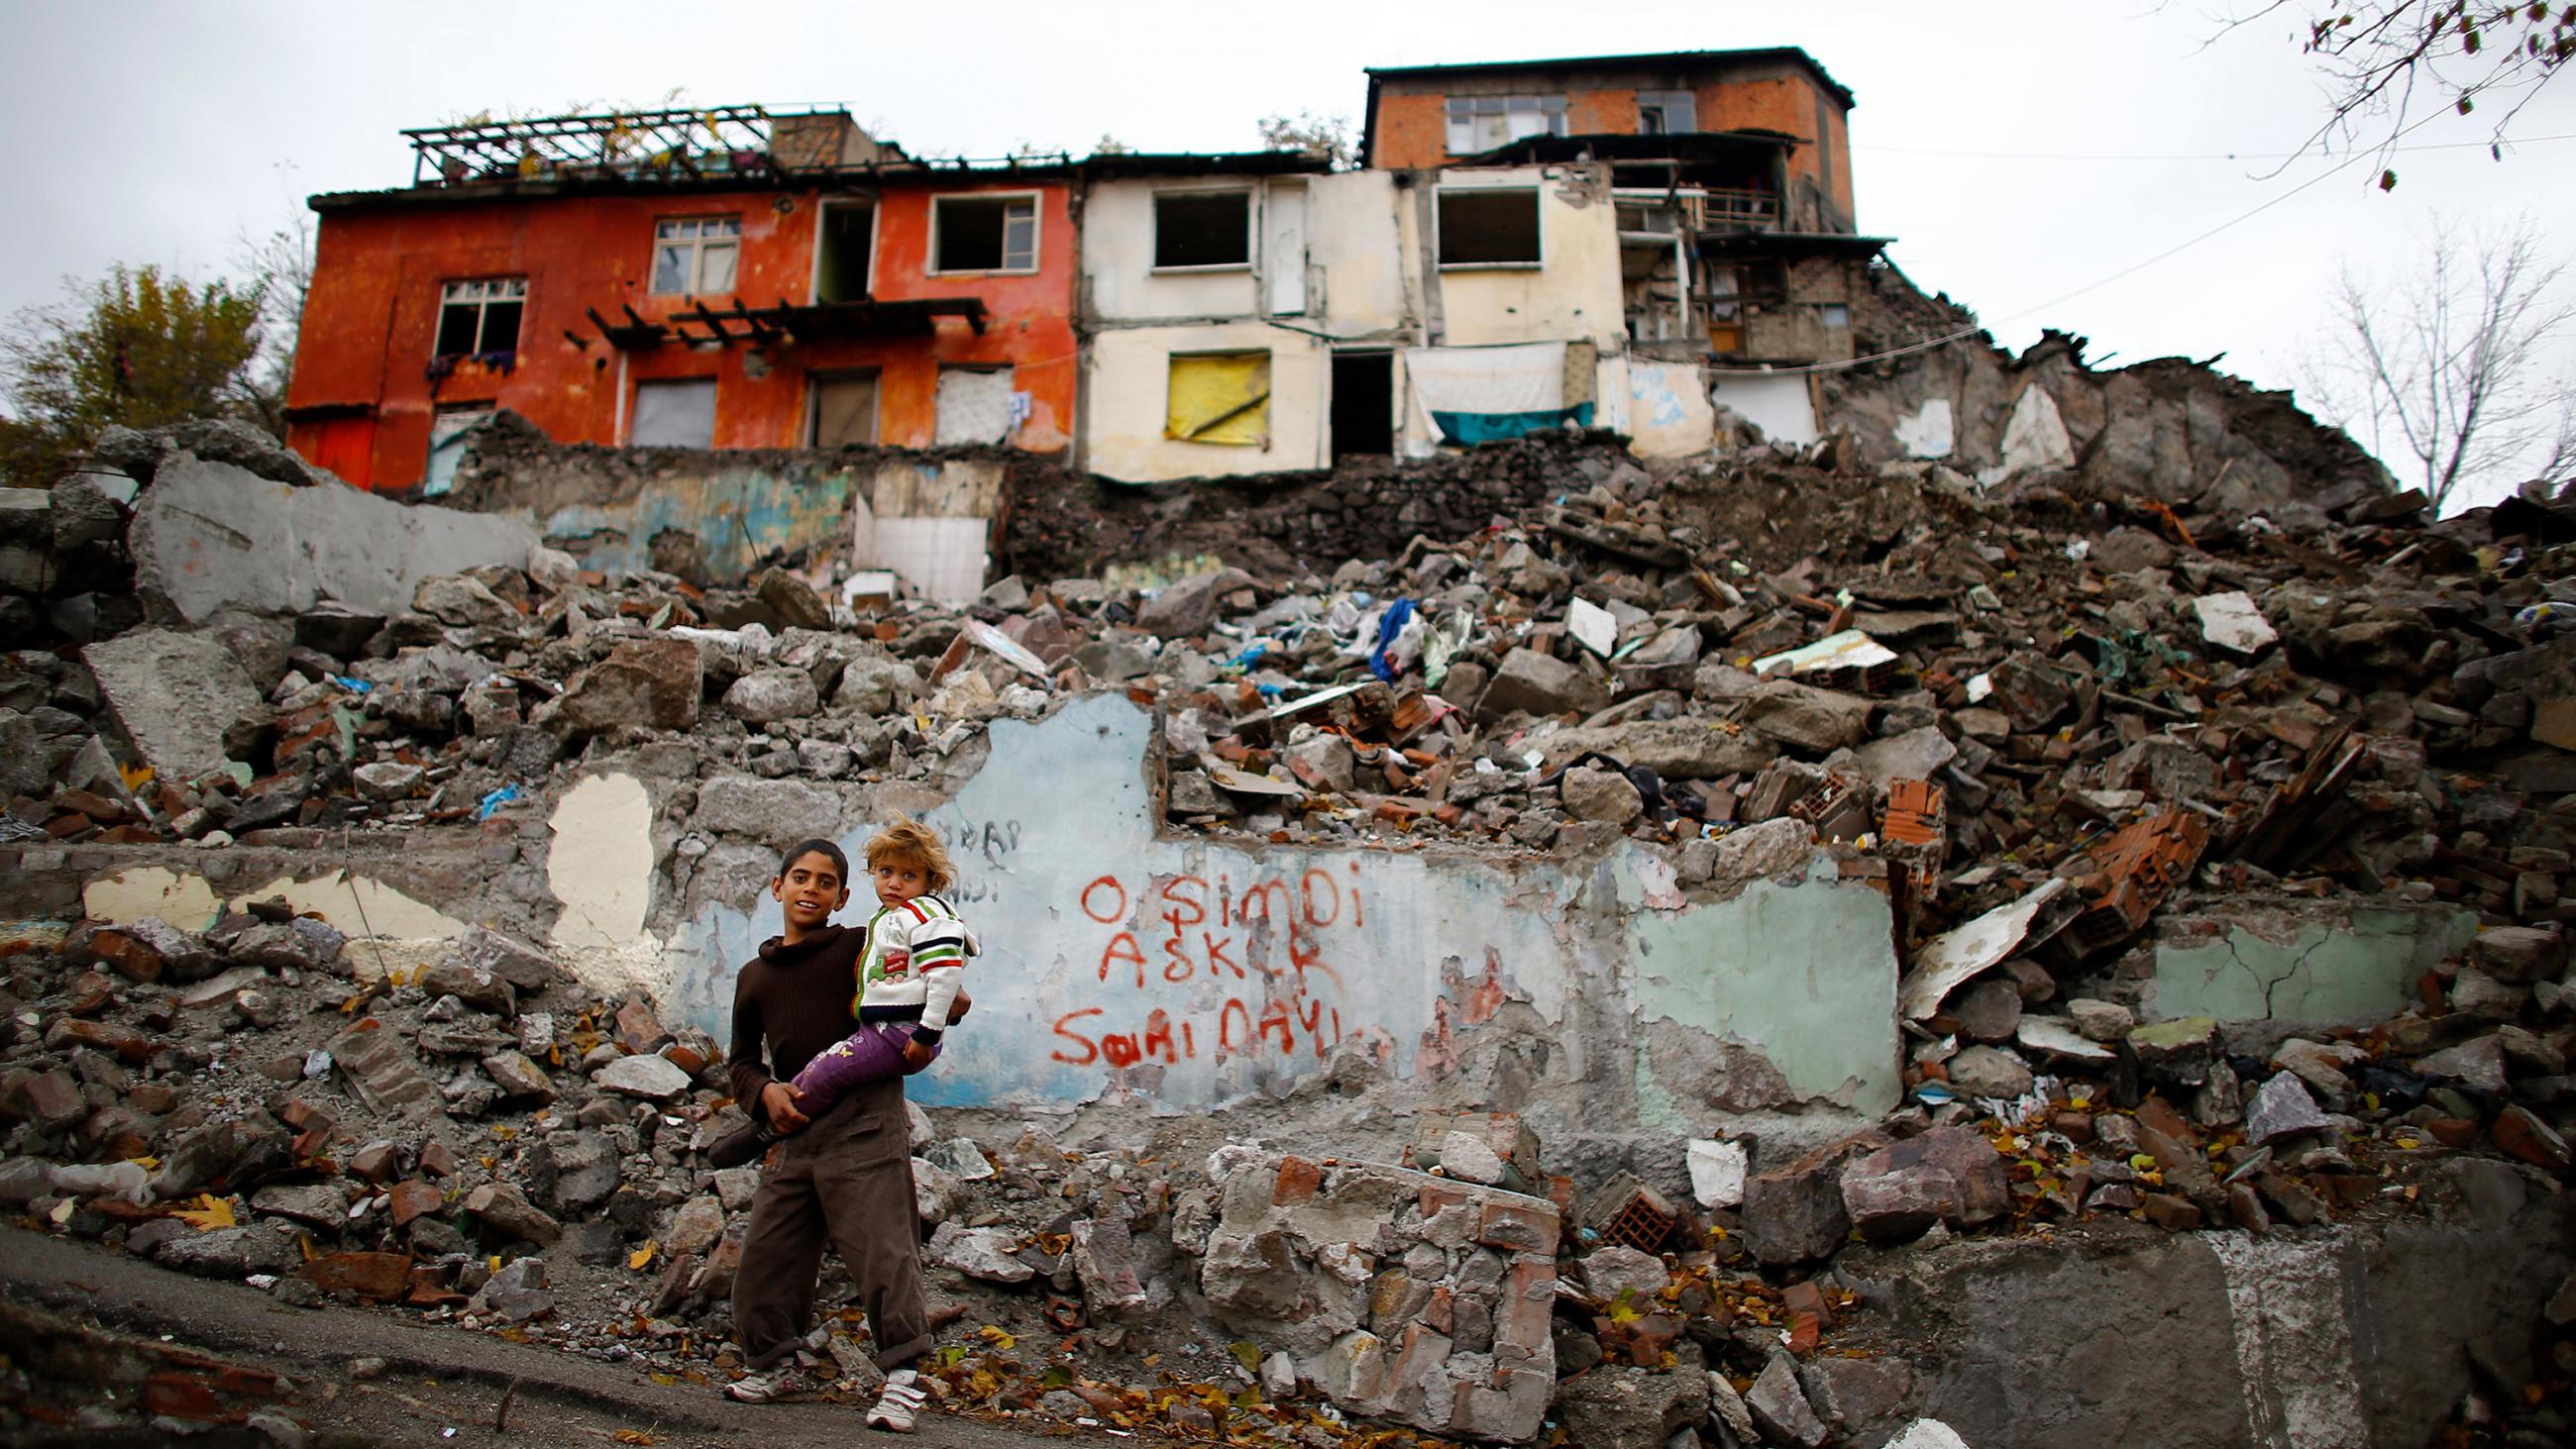 The graffiti reads, "He is now a soldier." Picture shows a boy holding his sister amid a crumbling, poor housing area. 